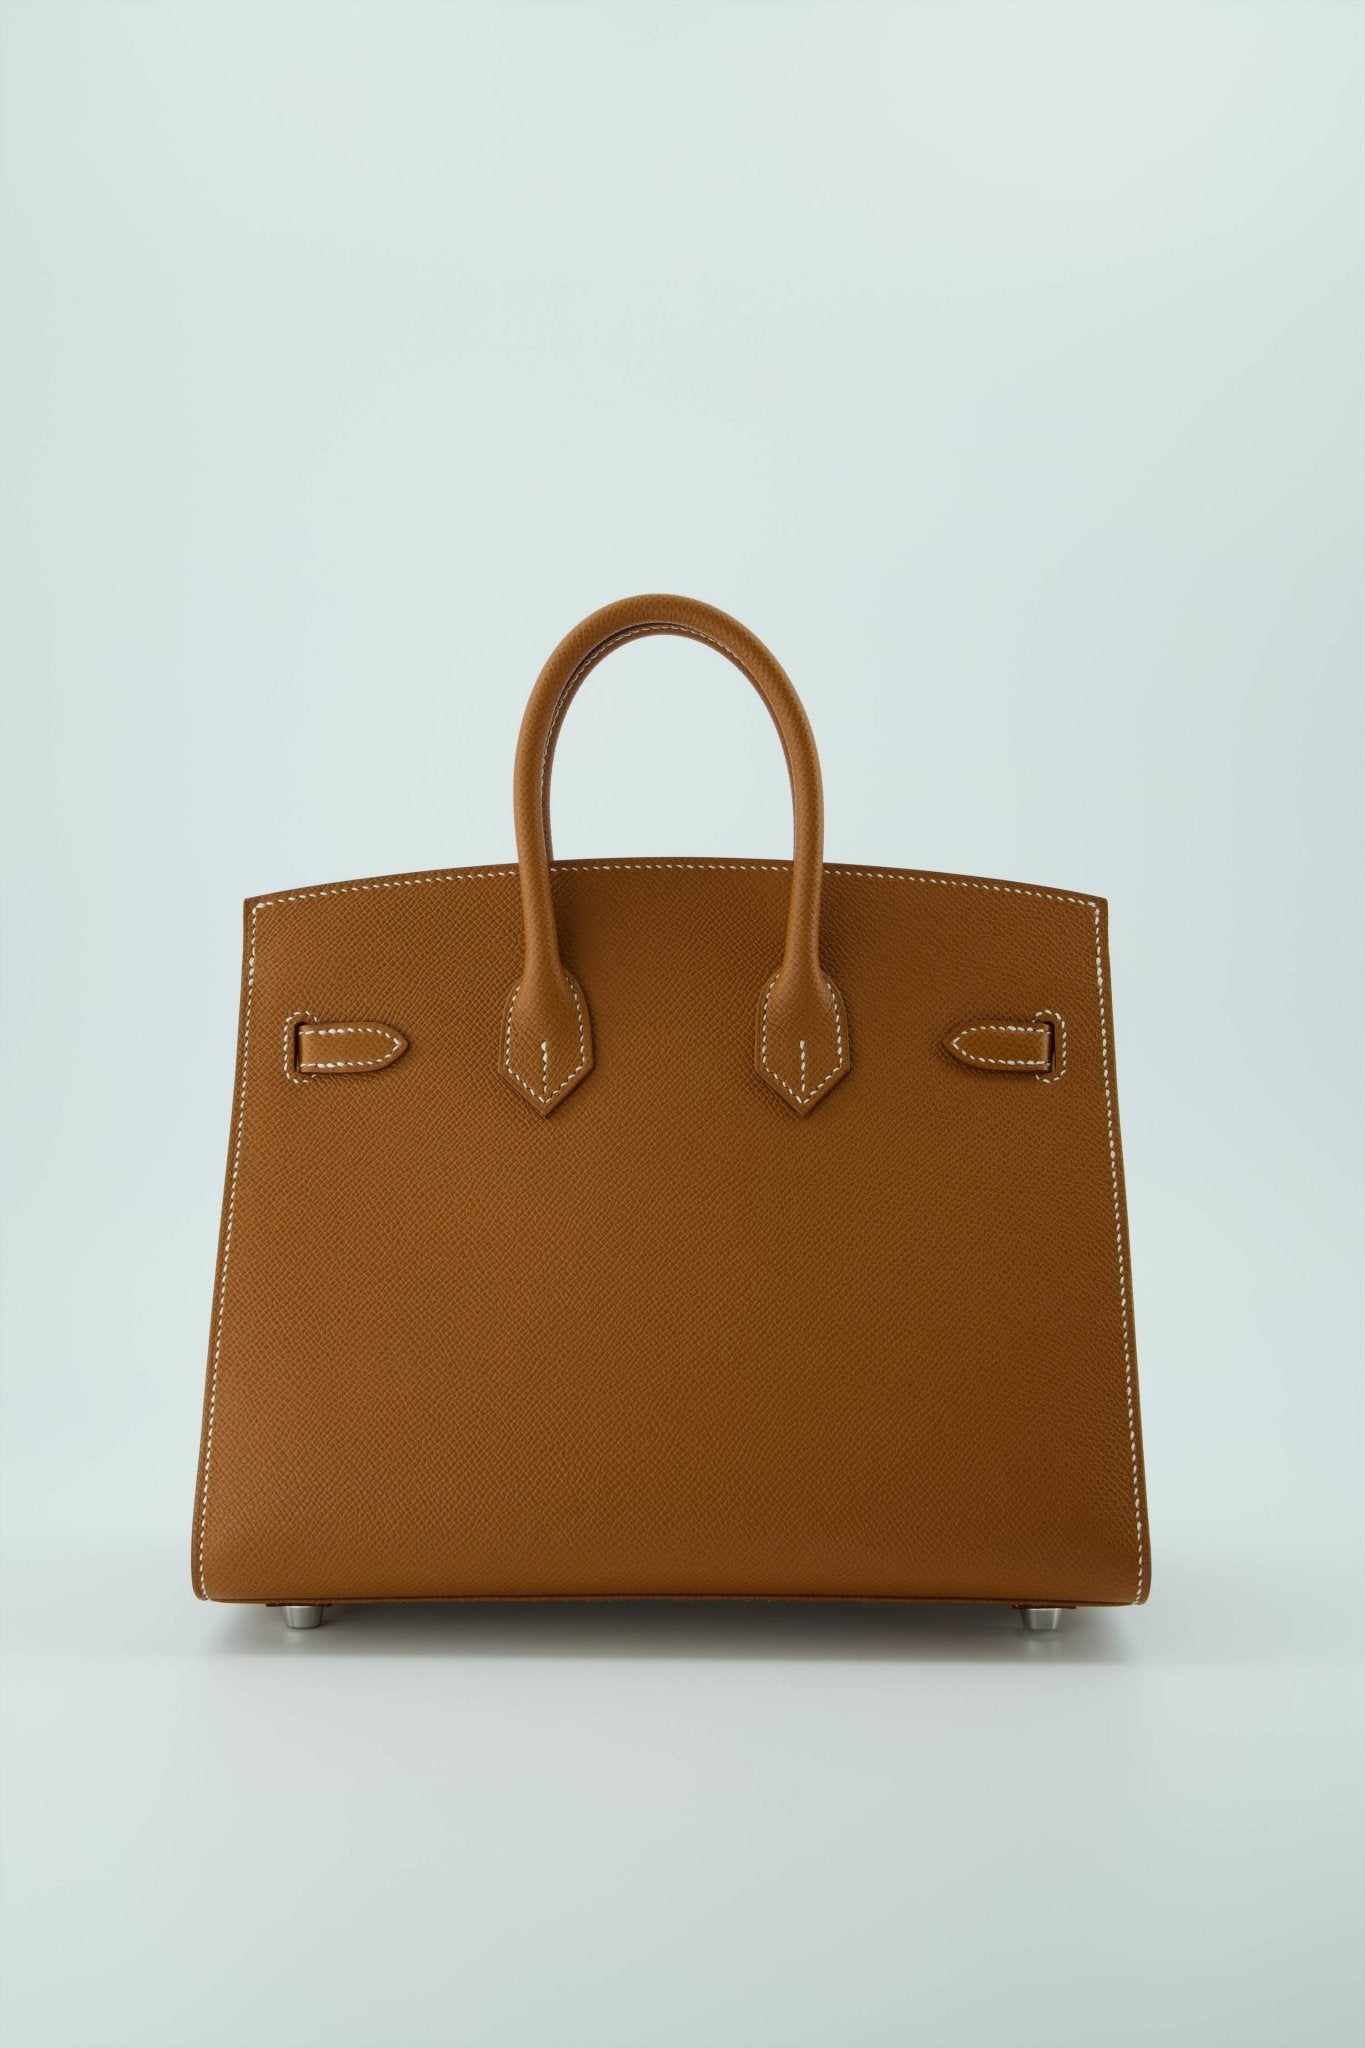 Where to buy replacement Rain Cover for your Hermes Bag?